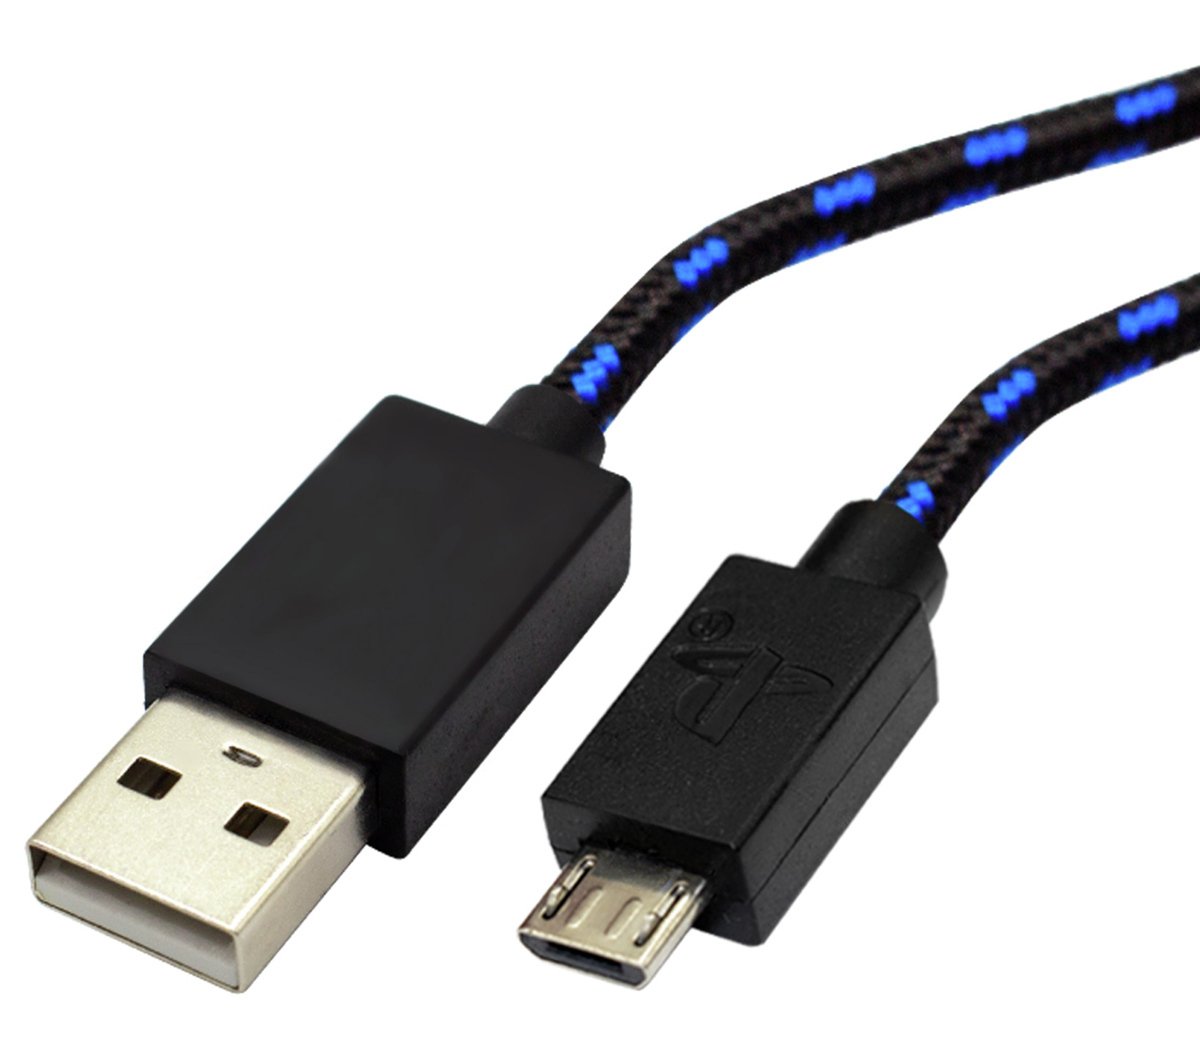 Official Sony PS4 4m Play and Charge Cable Review